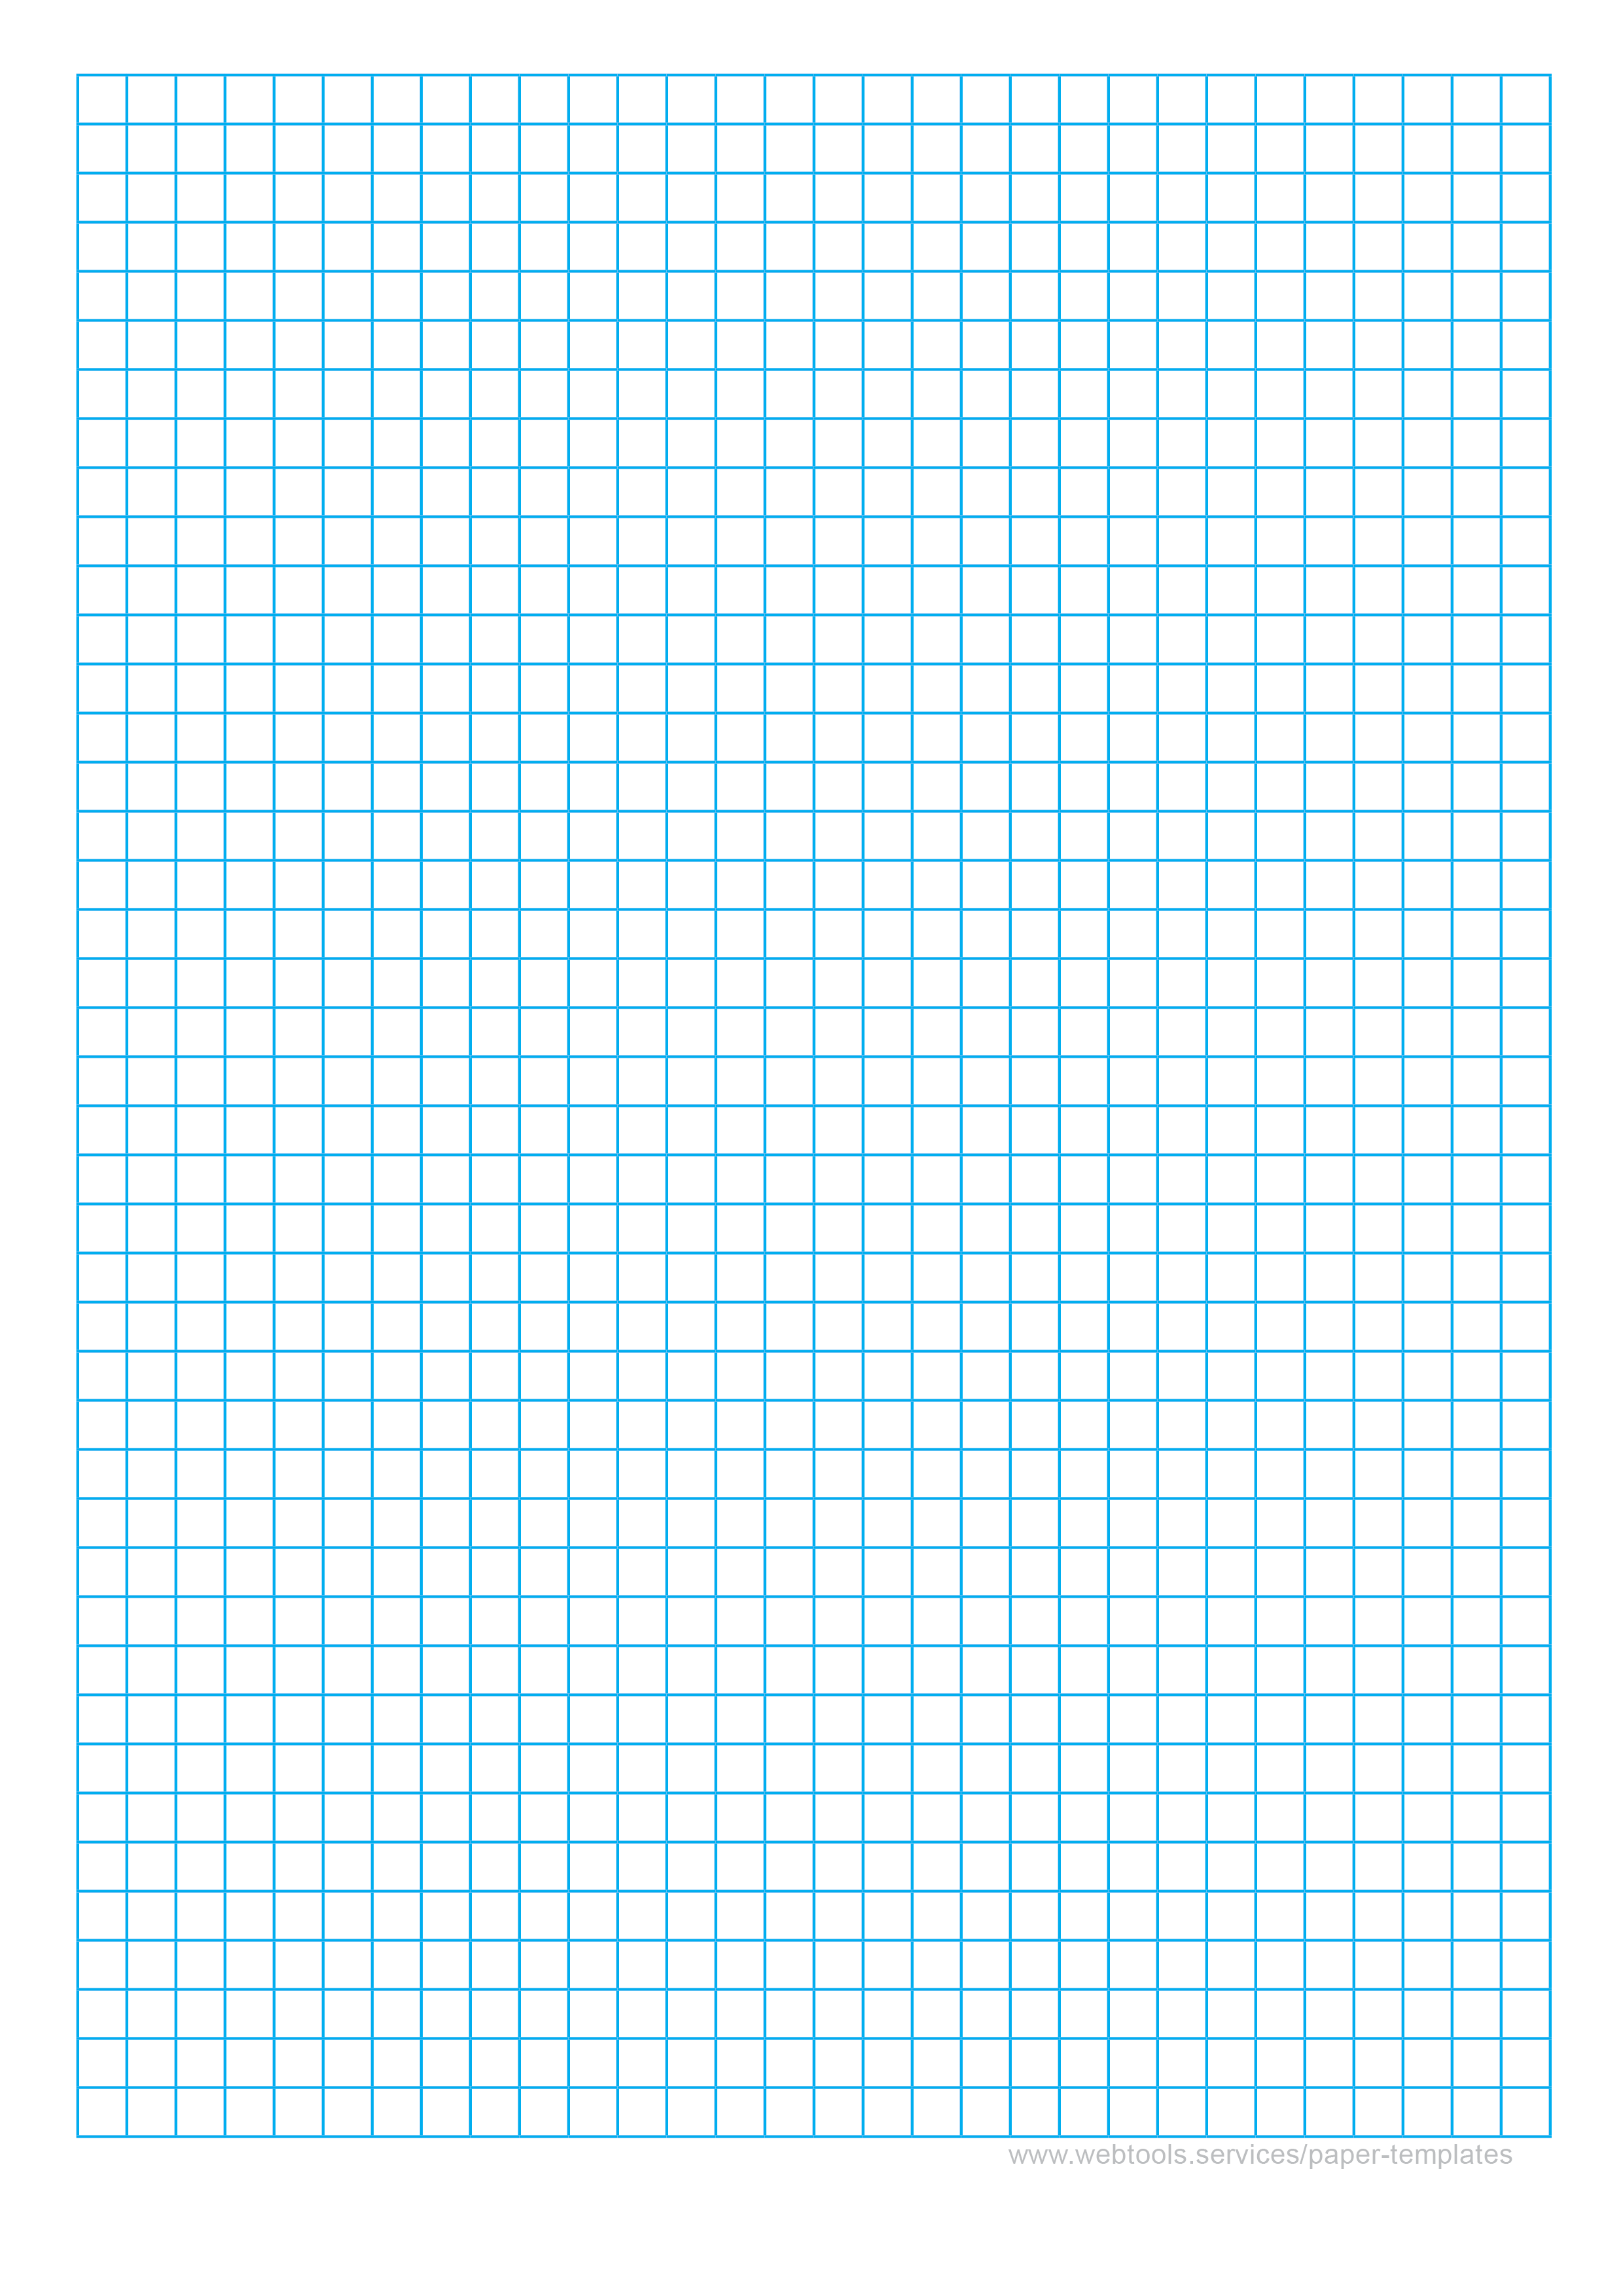 1-inch-graph-paper-free-printable-paper-by-madison-free-printable-1